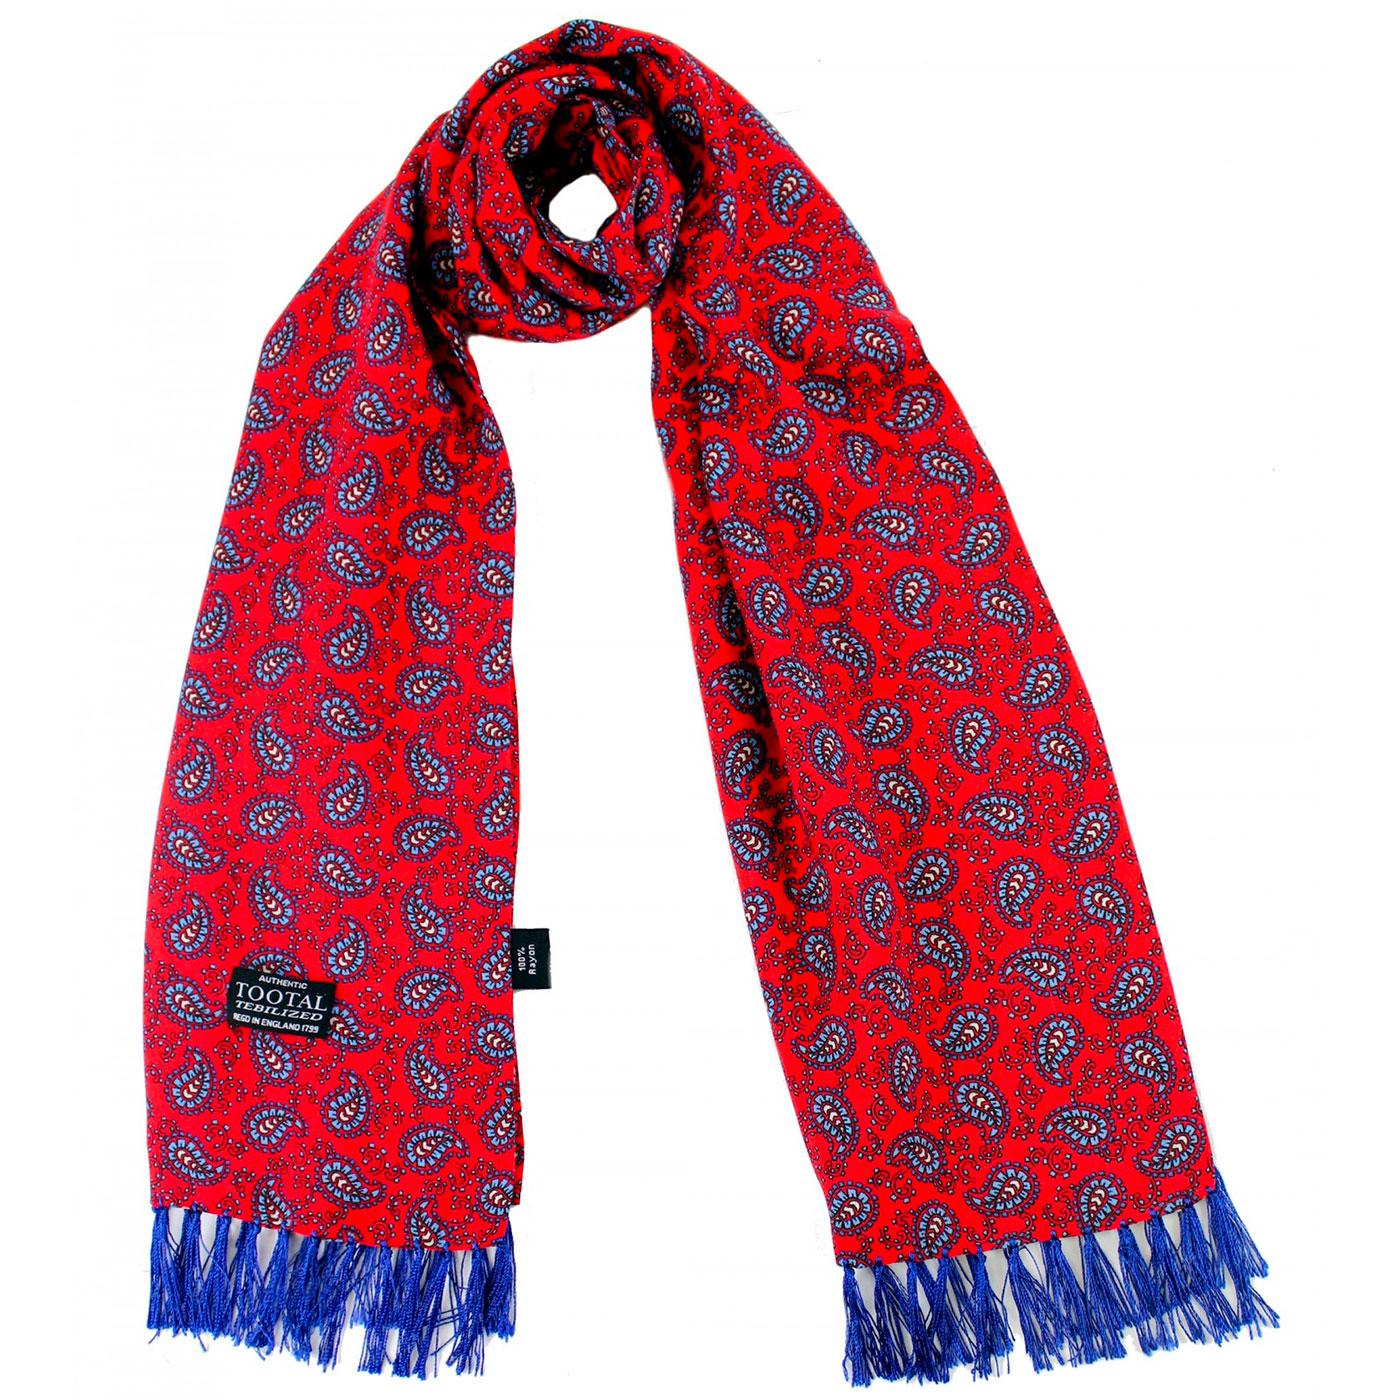 TOOTAL Retro Mod 60s Paisley Rayon Scarf in Red